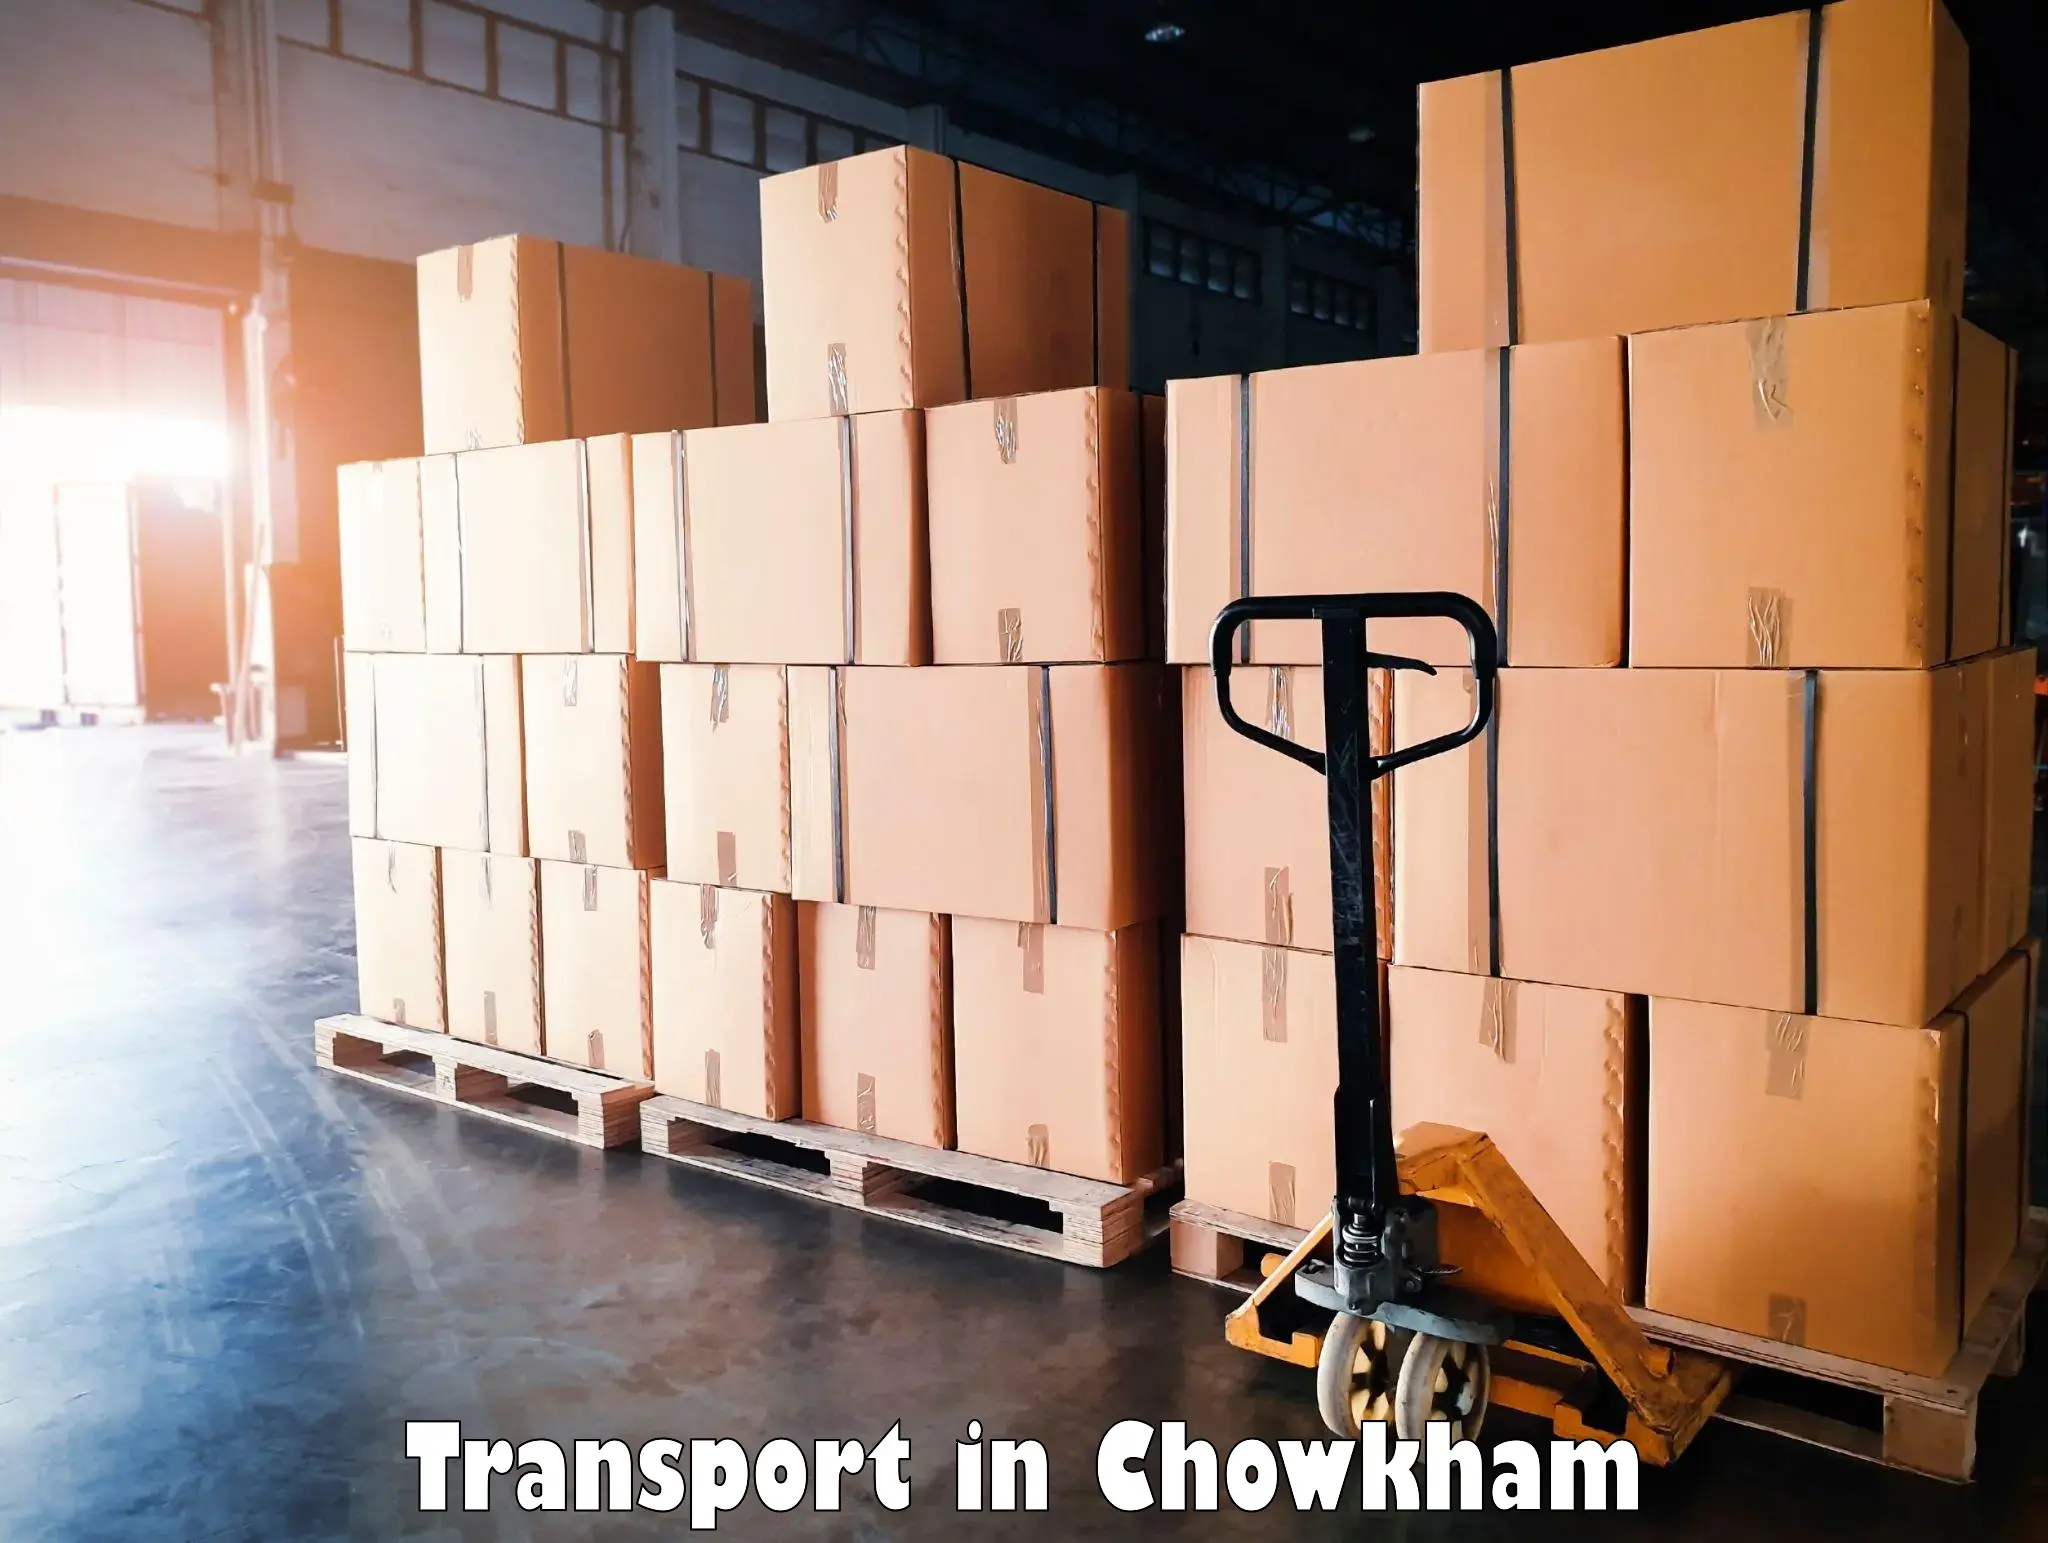 Online transport booking in Chowkham